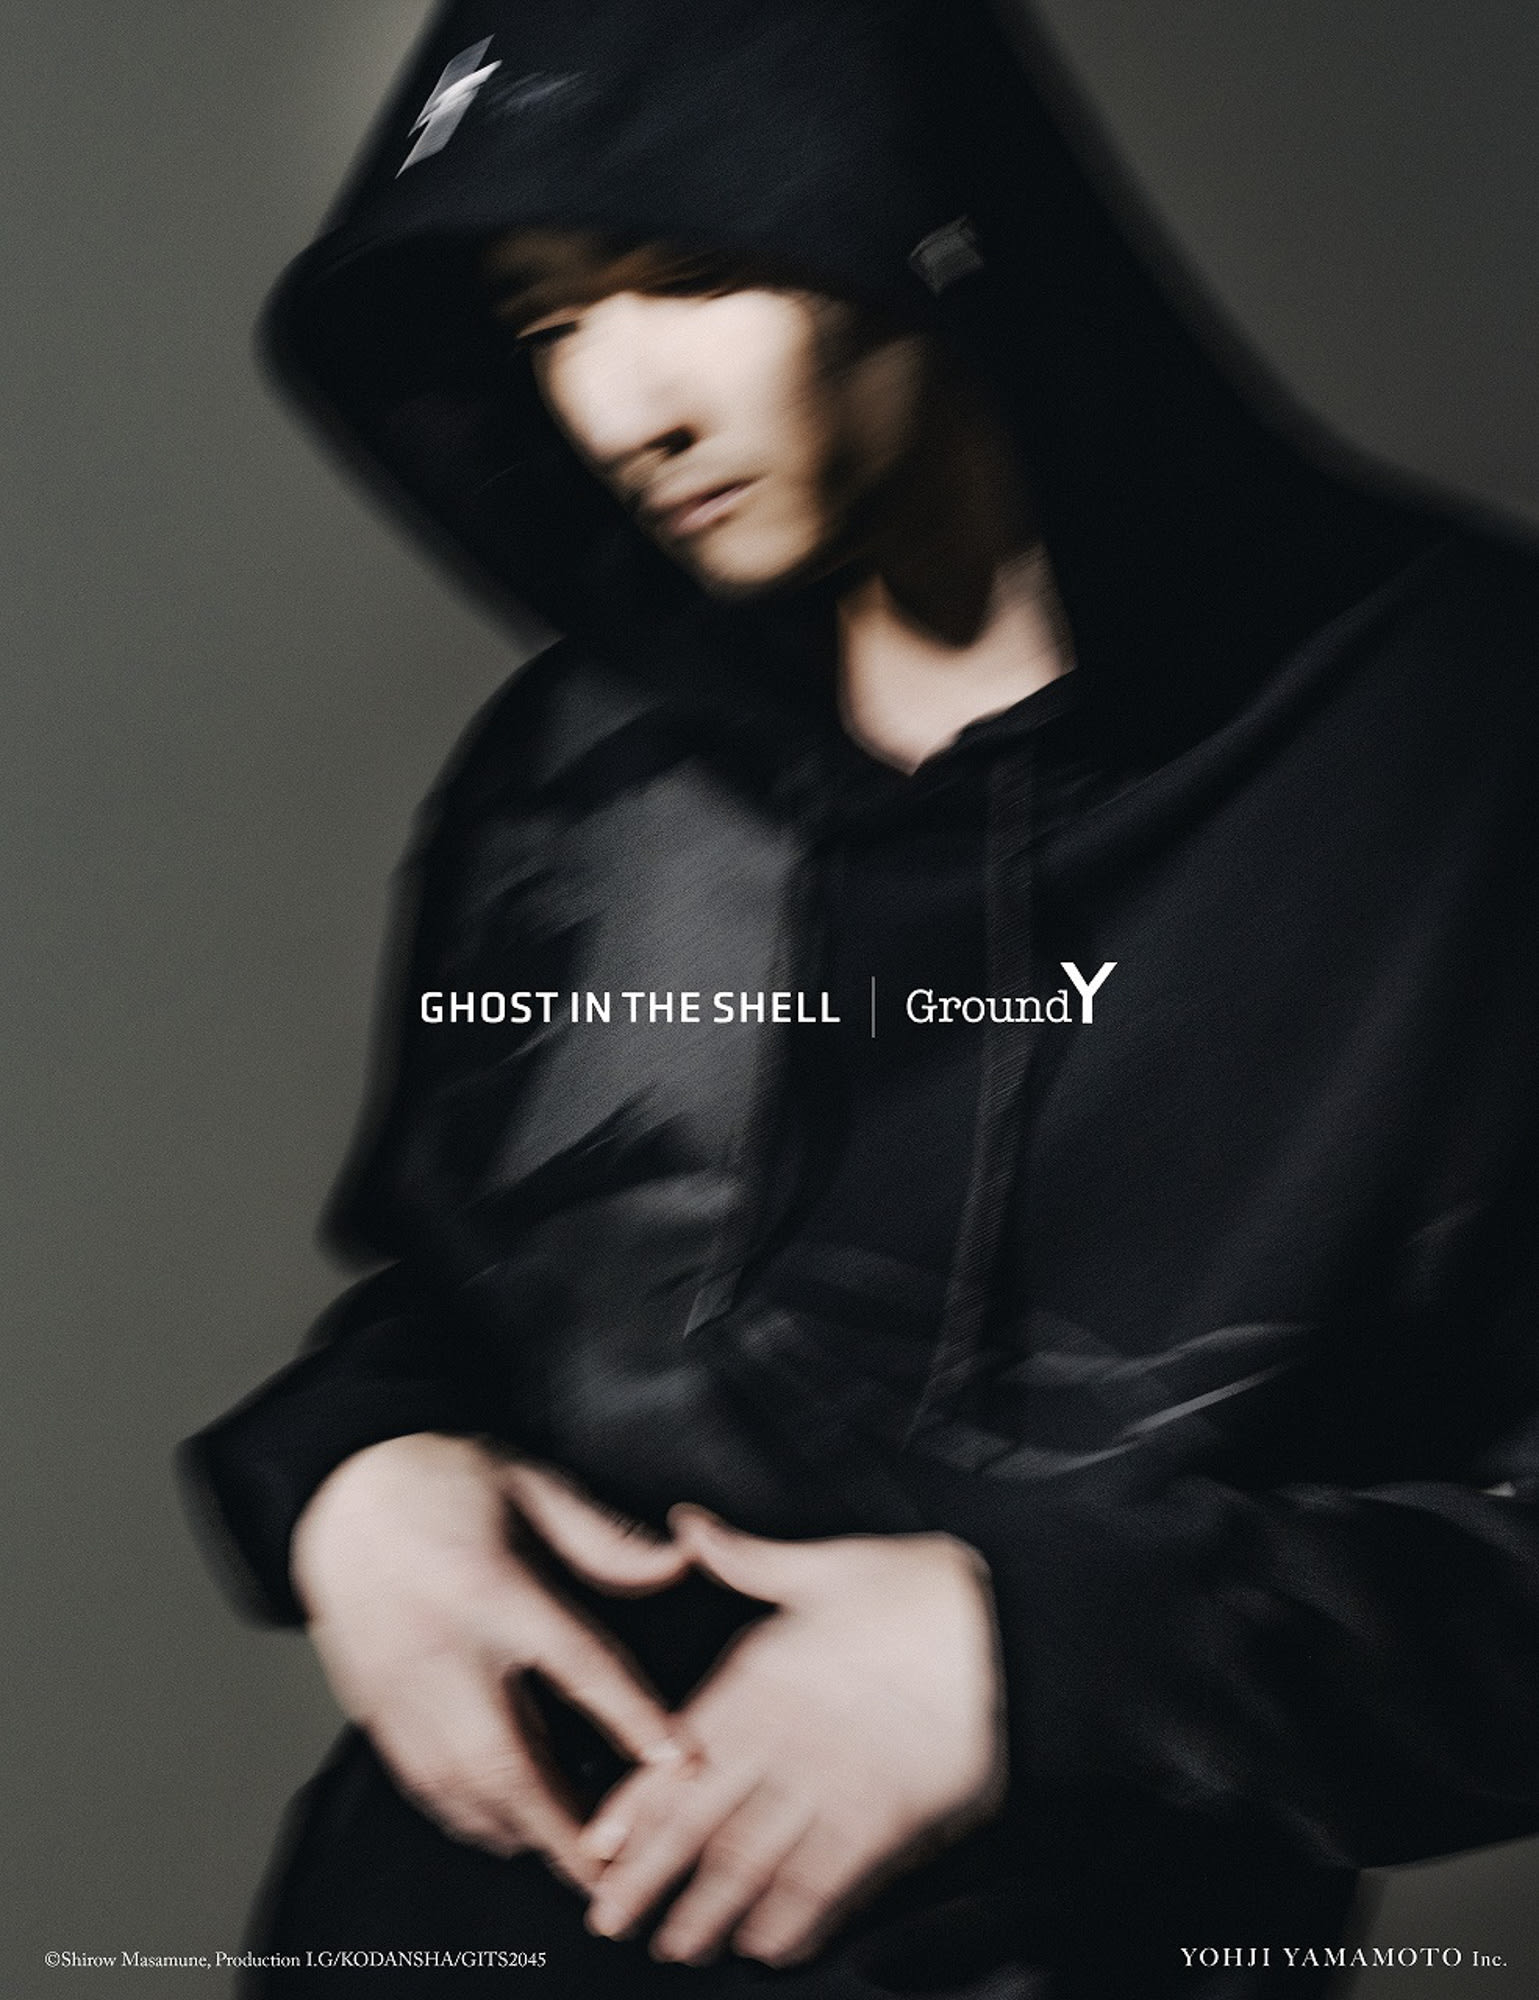 Ground Y × GHOST IN THE SHELL SAC_2045 × New Era 2021